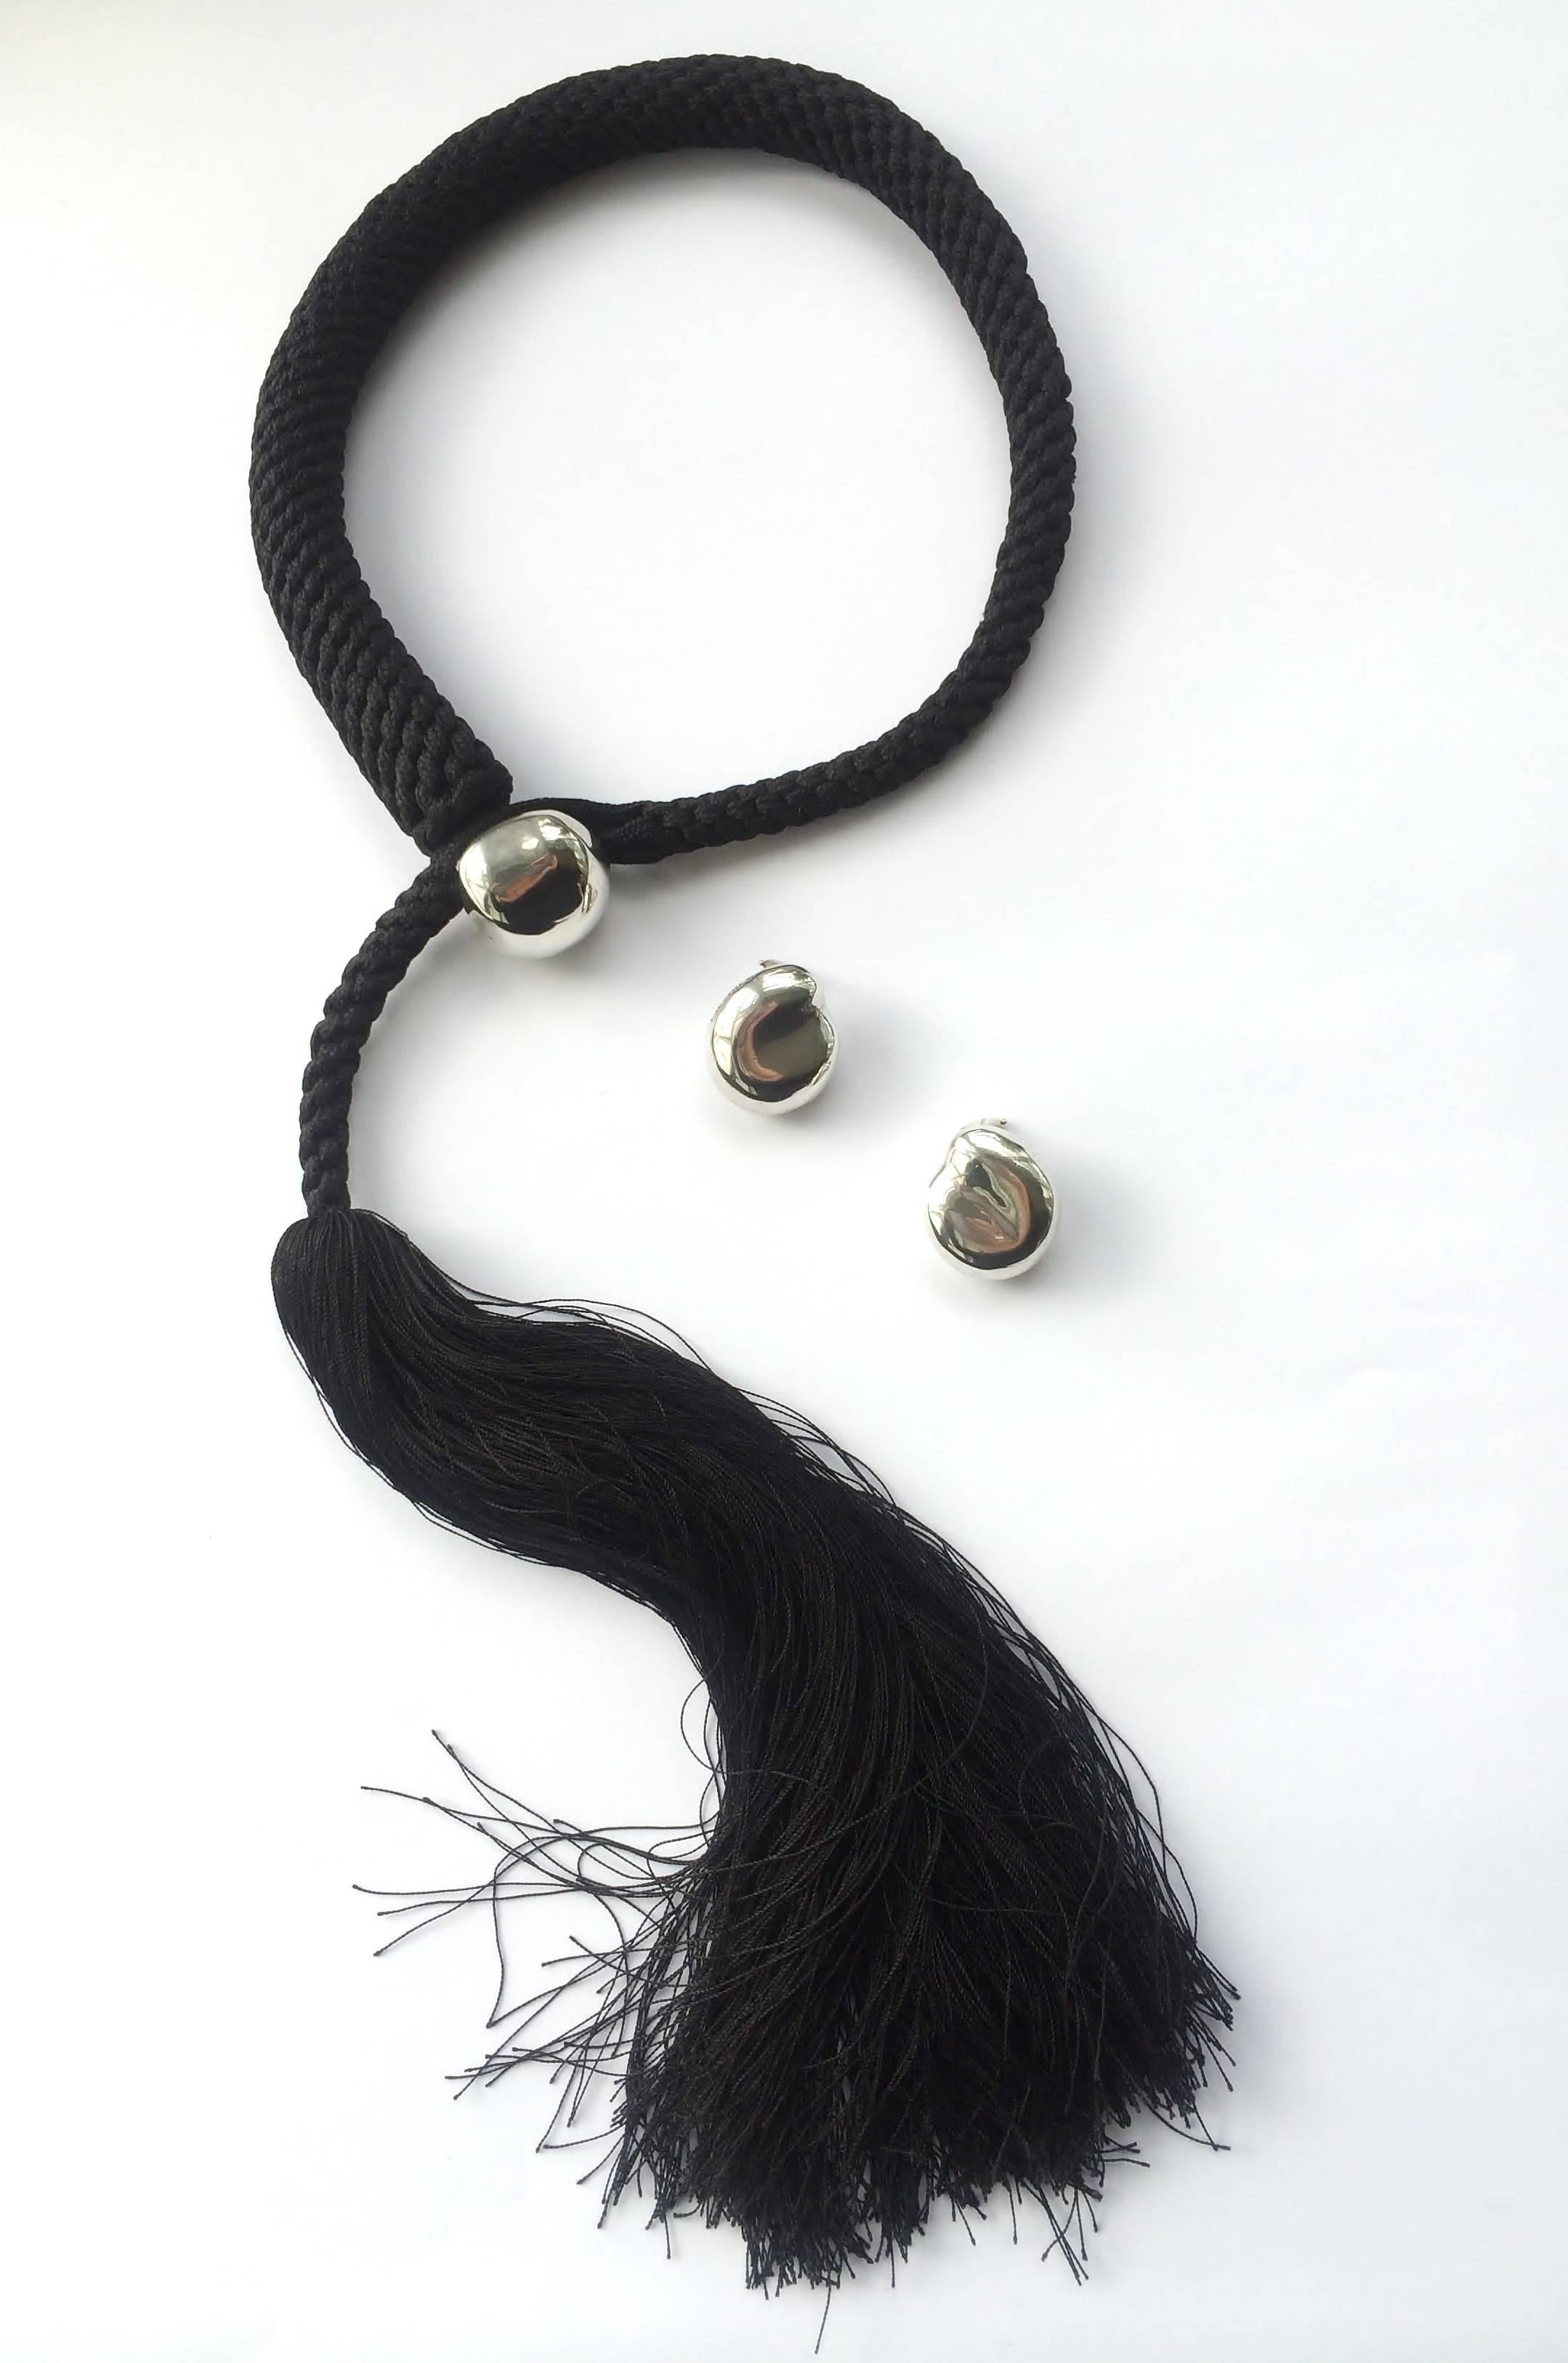 This elegant  'lariatt' style tassle necklace in woven silk and sterling silver, by Tiffany & Co, designed by famous house designer Elsa Peretti, in 1981, comes with matching 'bean' earrings, also in sterling silver. Both necklace and earrings are